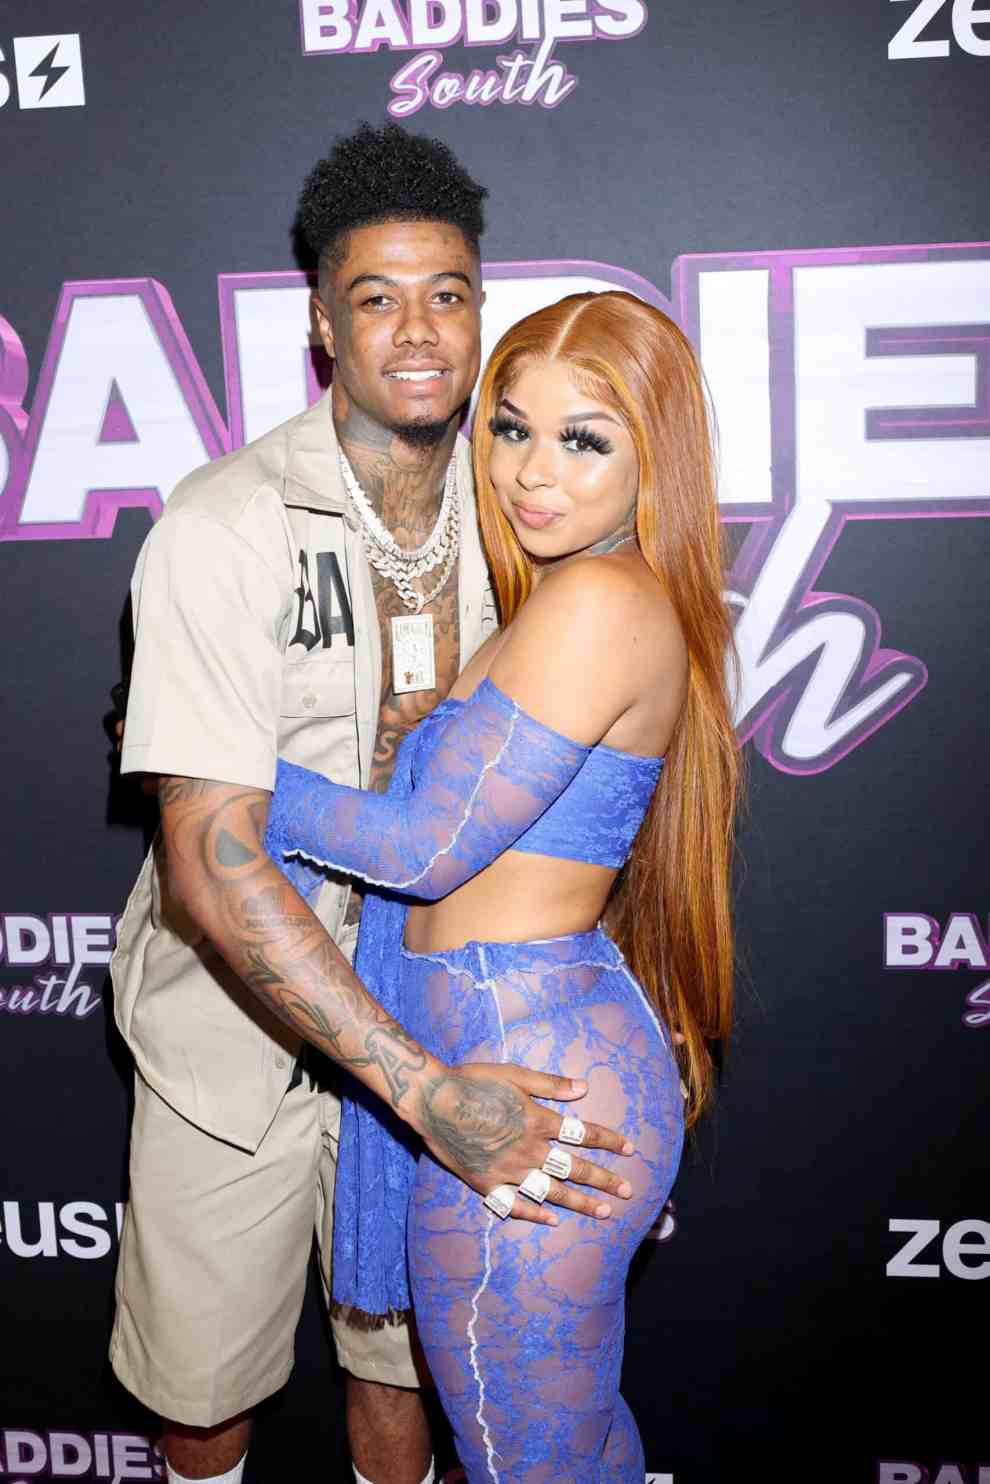 chriseanroc and Blueface attend the ZEUS Network BADDIES SOUTH Houston Premiere at Regal Edwards Greenway Grand Palace ScreenX & RPX on June 12, 2022 in Houston, Texas.